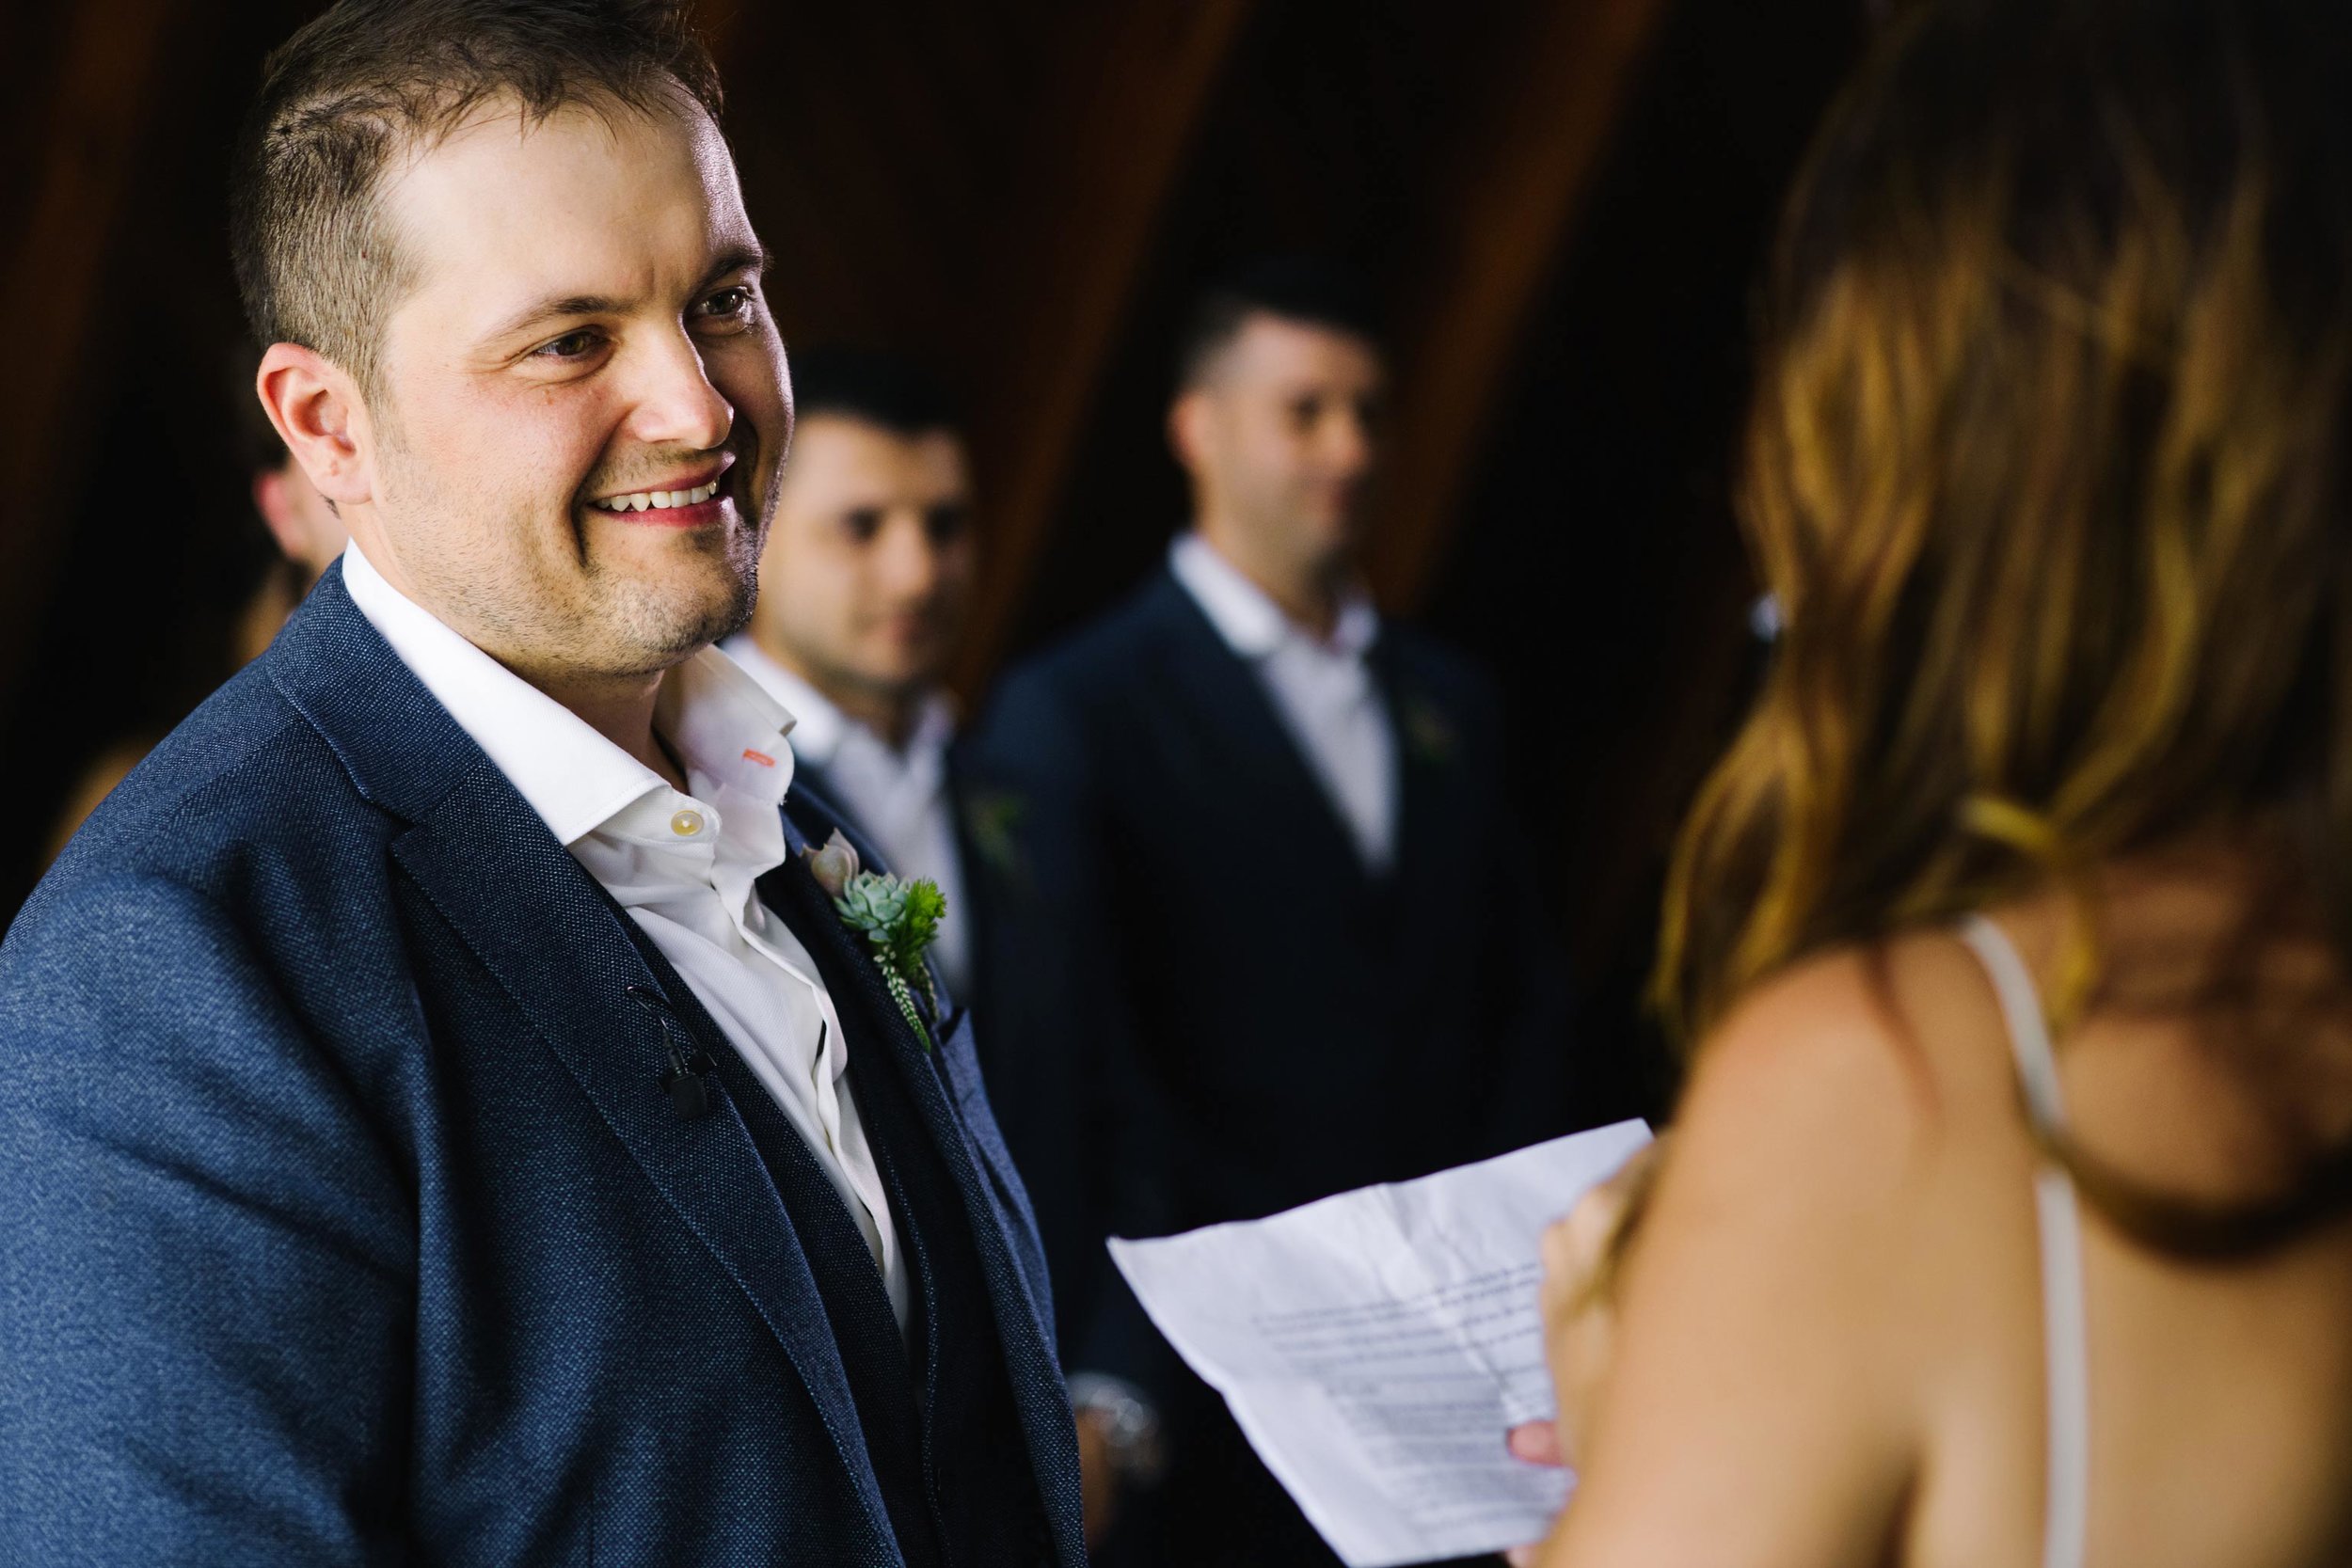 Groom smiles at bride during wedding ceremony